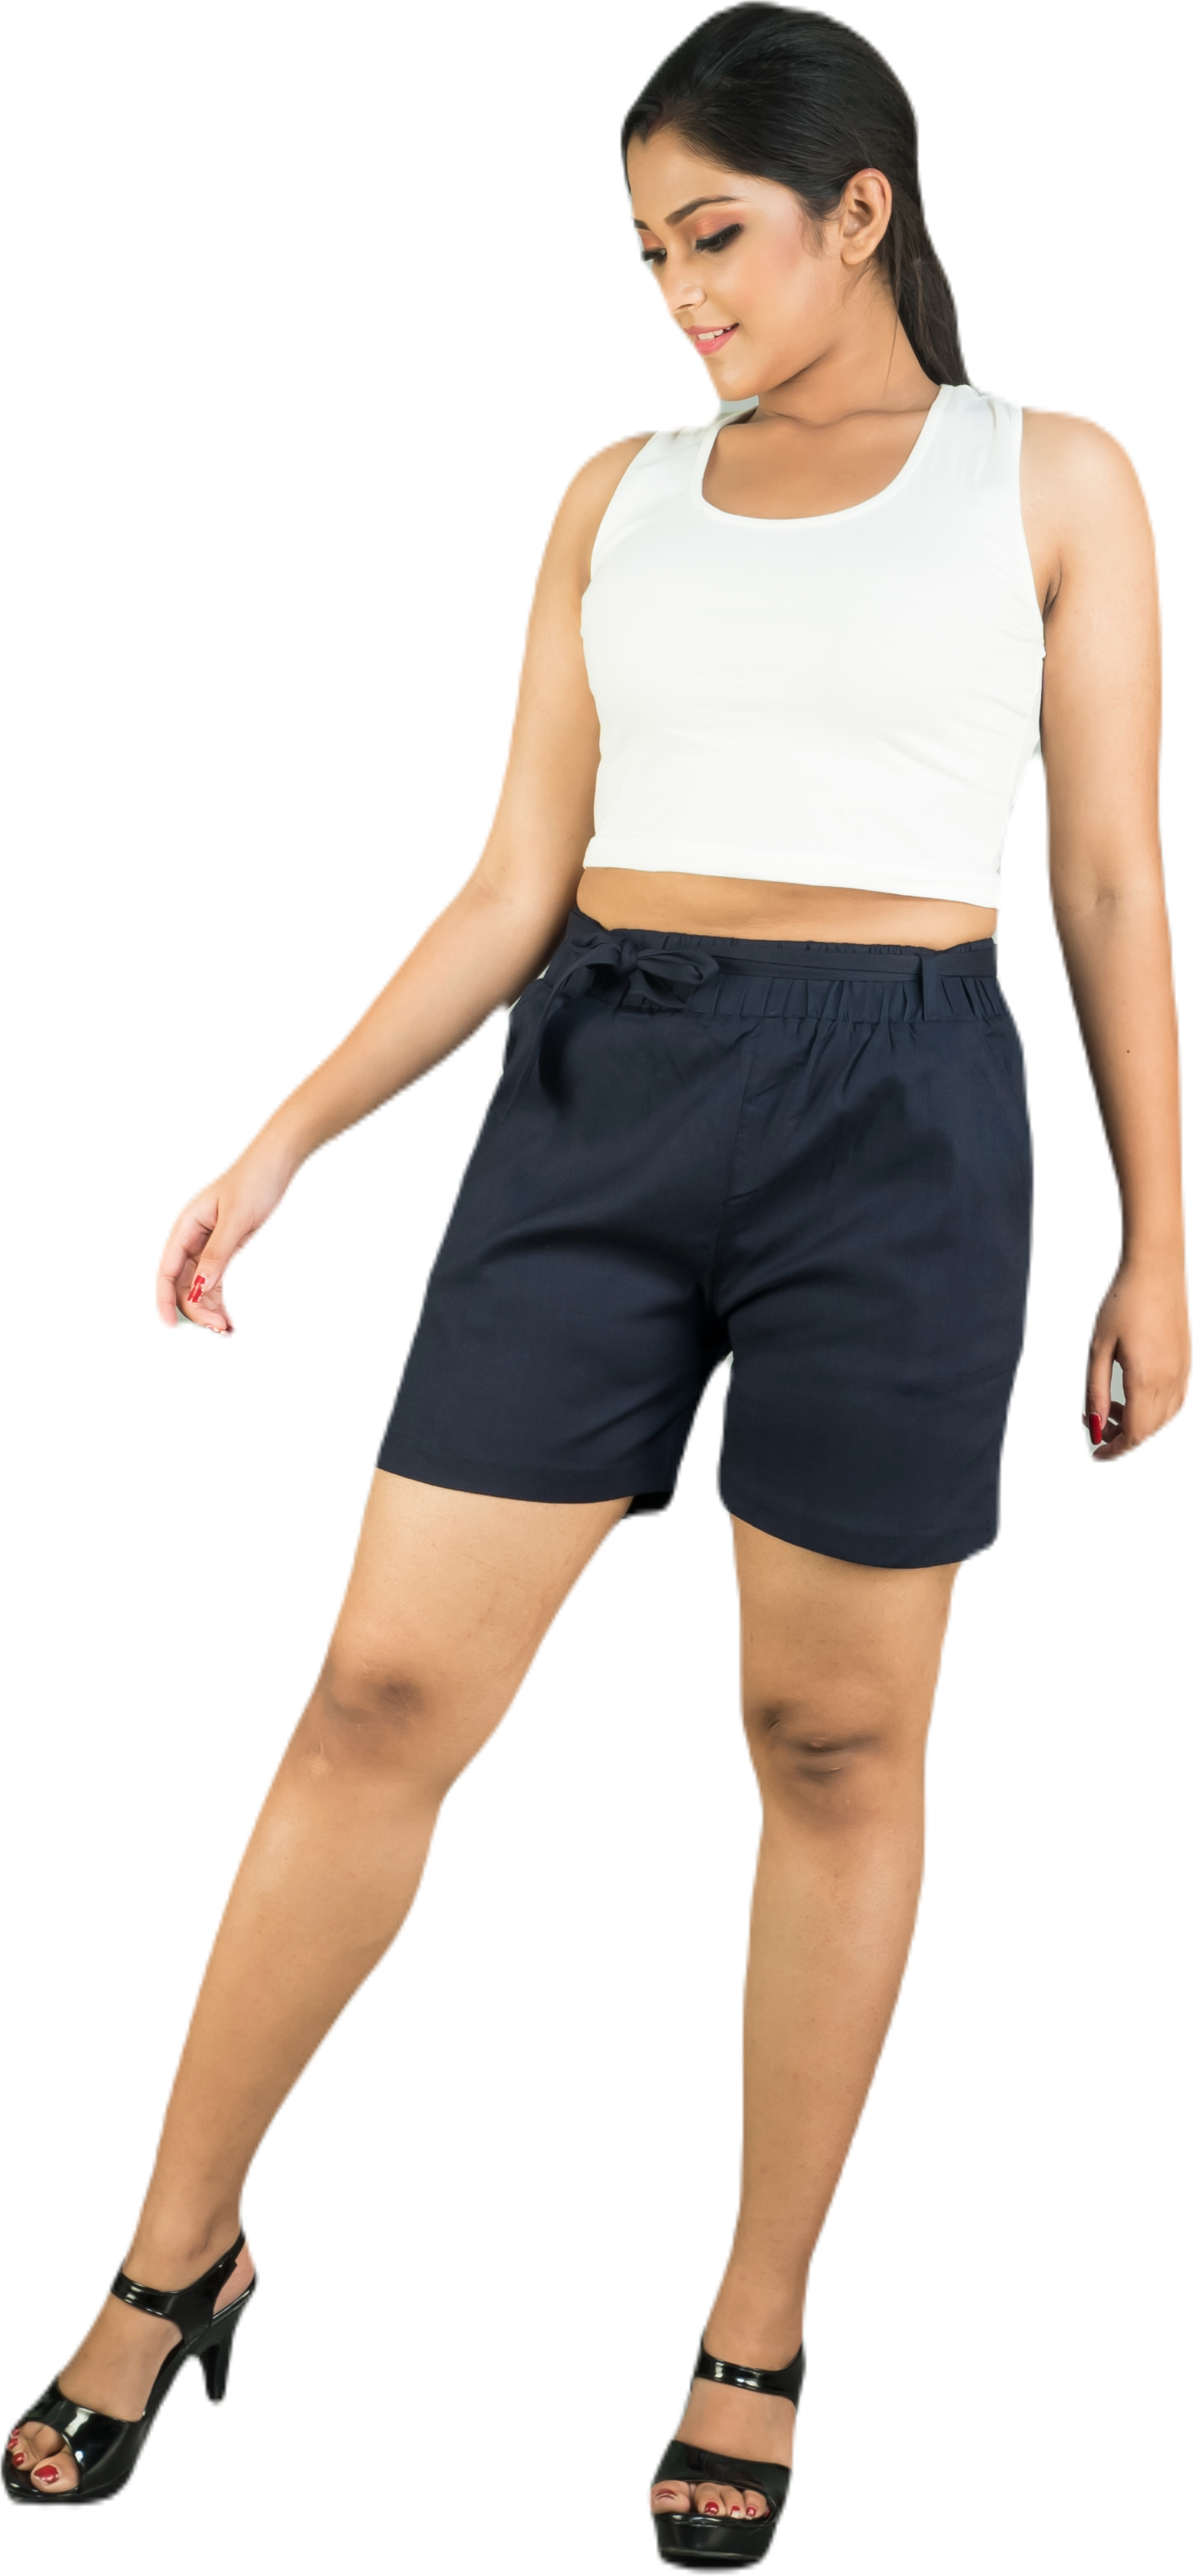 TRENDY BELTED HOT PANTS